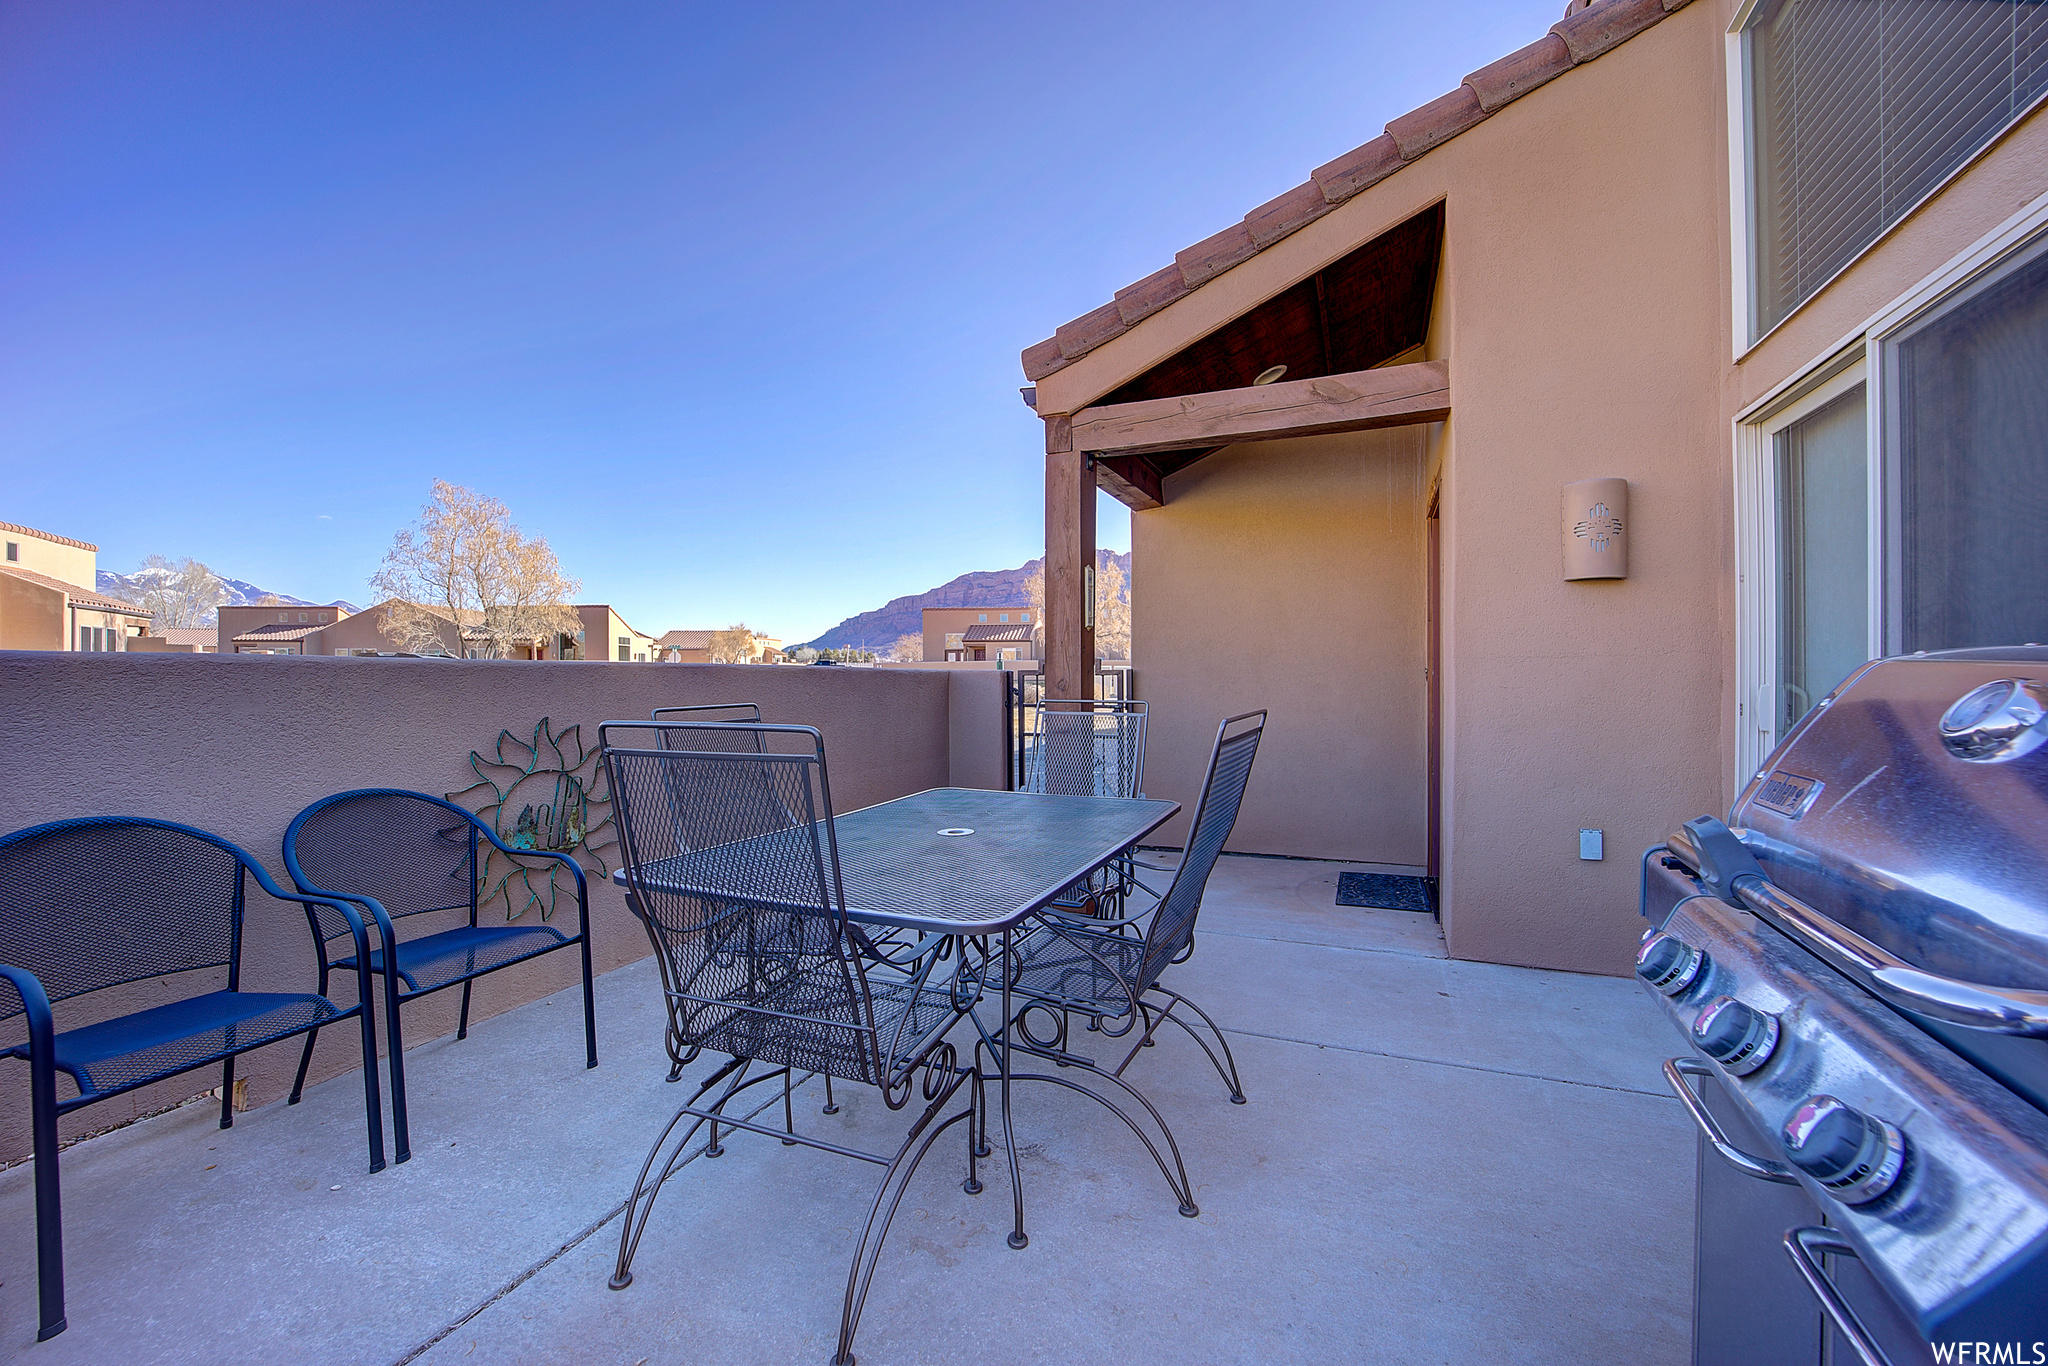 3686 S SPANISH VALLEY #C-1, Moab, Utah 84532, 3 Bedrooms Bedrooms, 12 Rooms Rooms,2 BathroomsBathrooms,Residential,For sale,SPANISH VALLEY,1864045